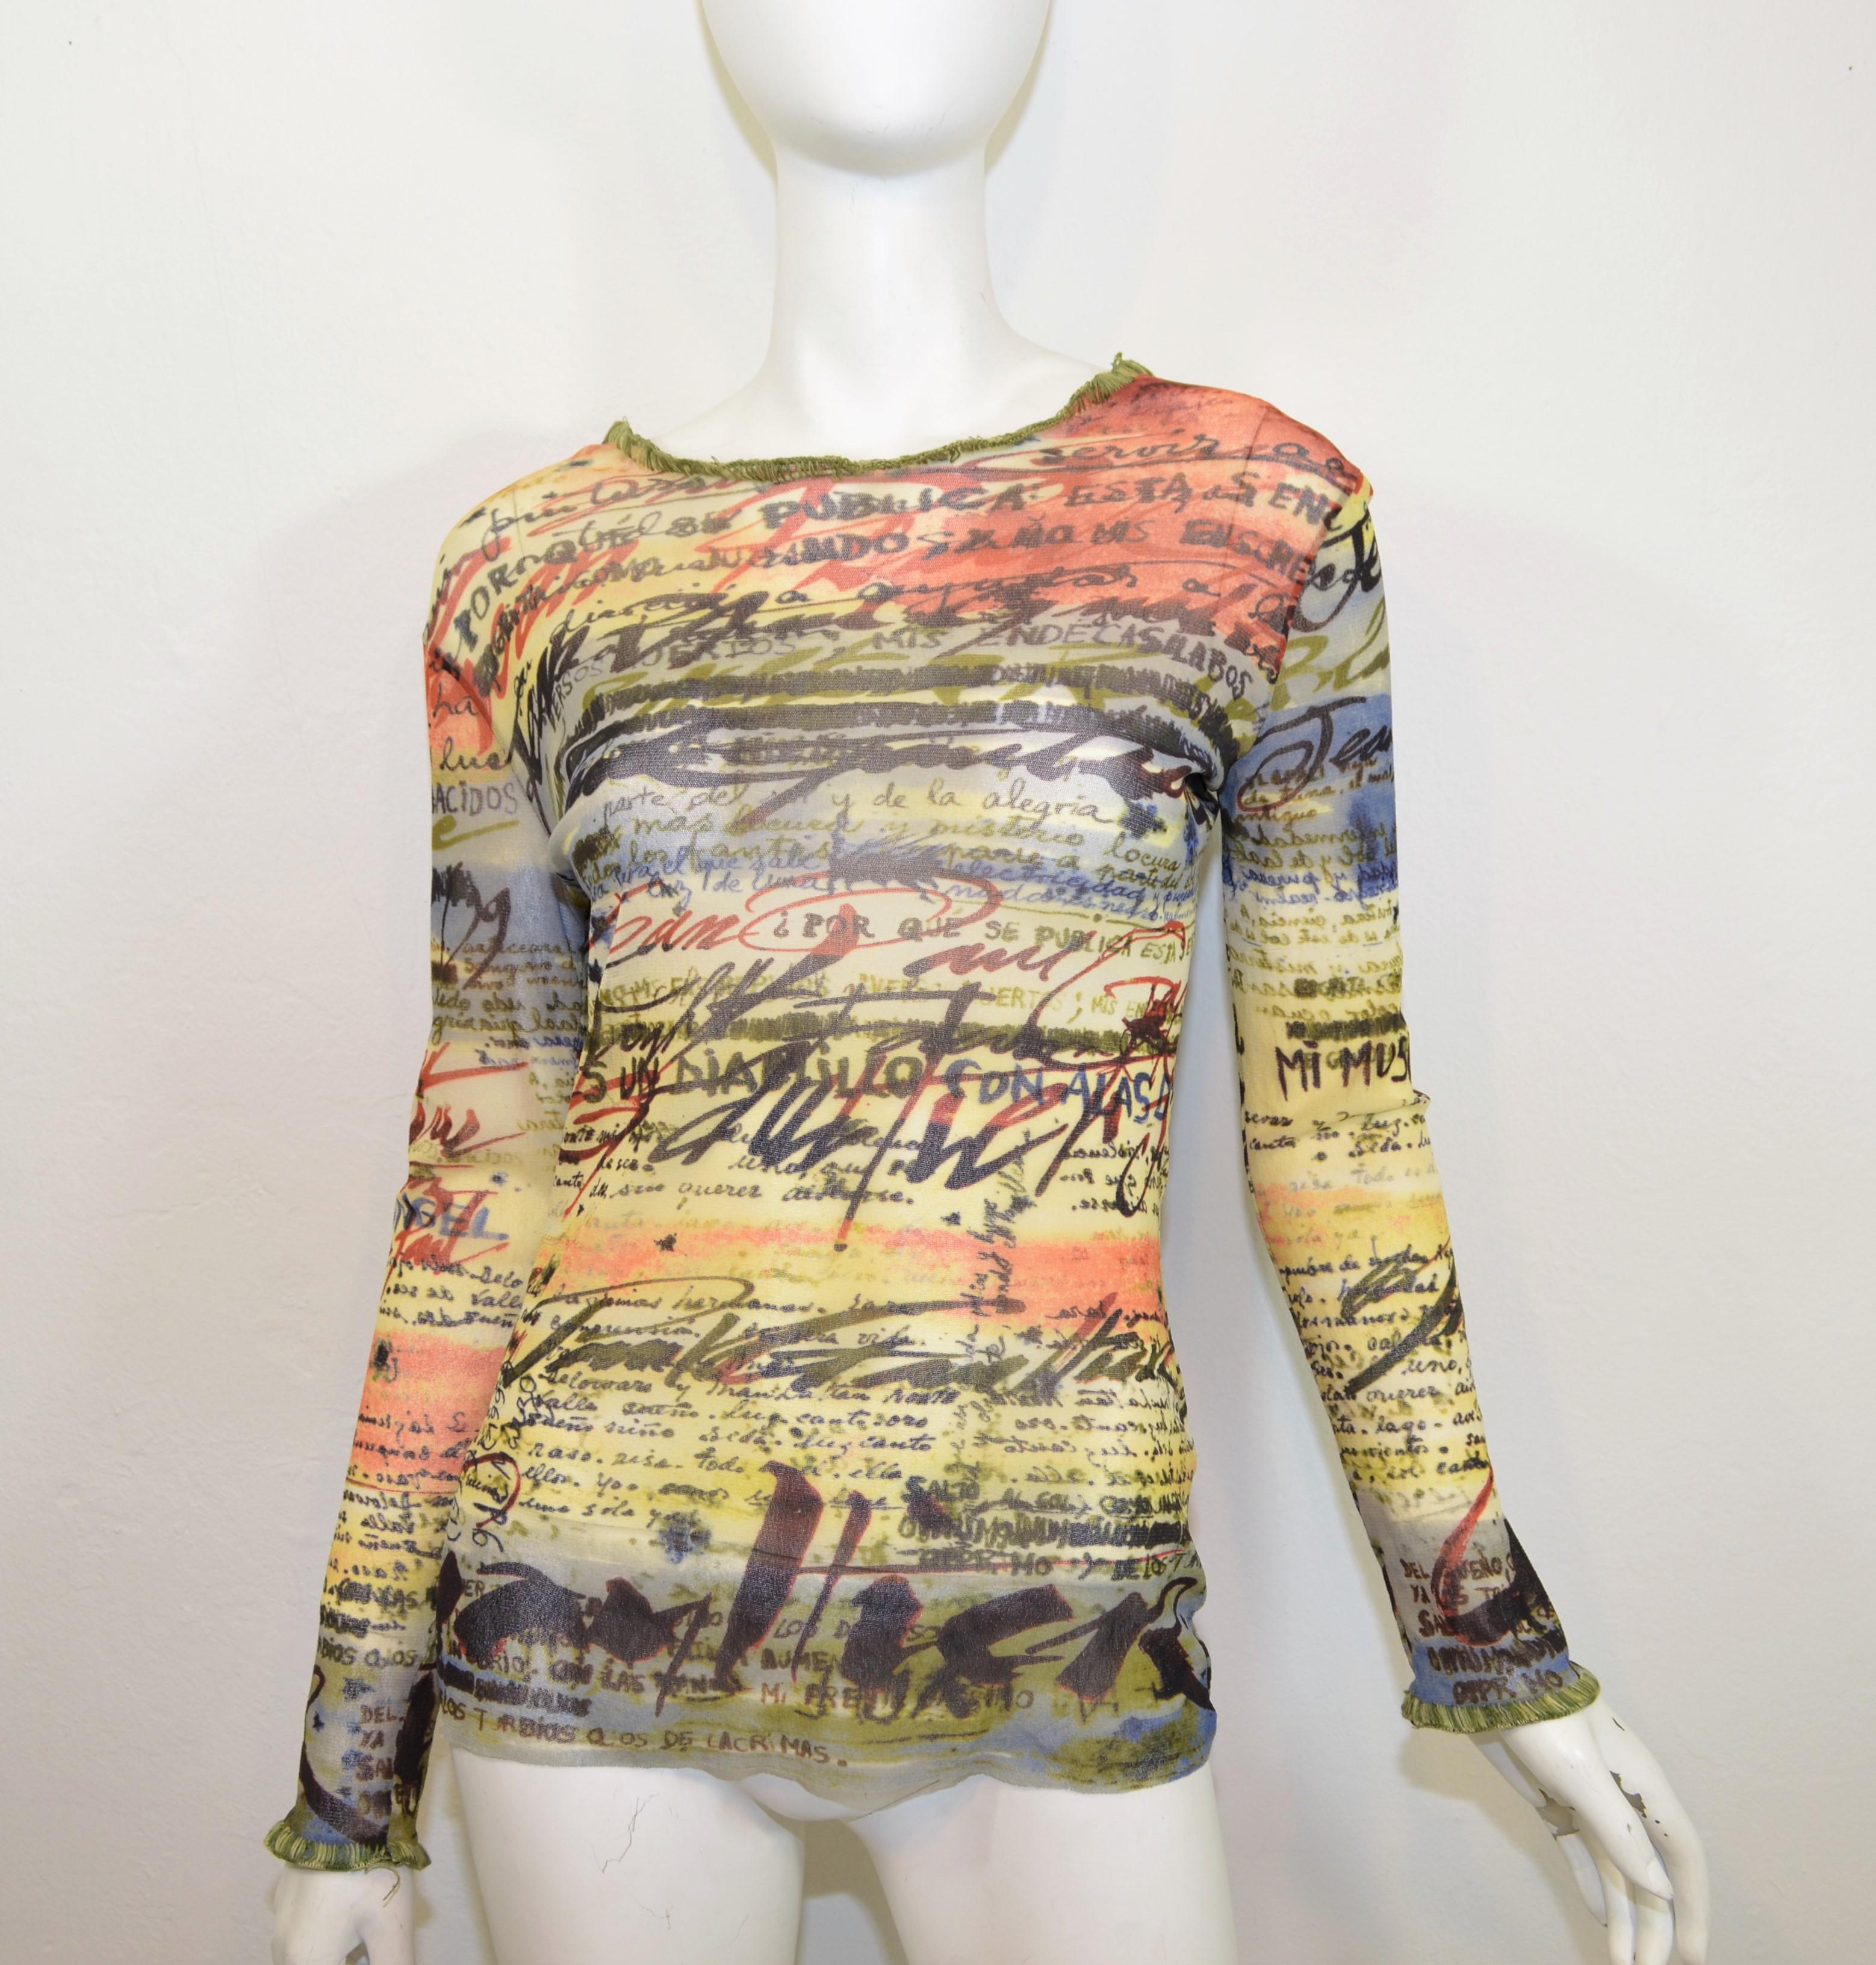 Jean Paul Gaultier mesh top features a multi-color graffiti-inspired print throughout with a loose knit trim along the opening and at the cuffs. Top is labeled a size M, made in Italy.

Measurements:
bust 37''
sleeves 23''
length 25''